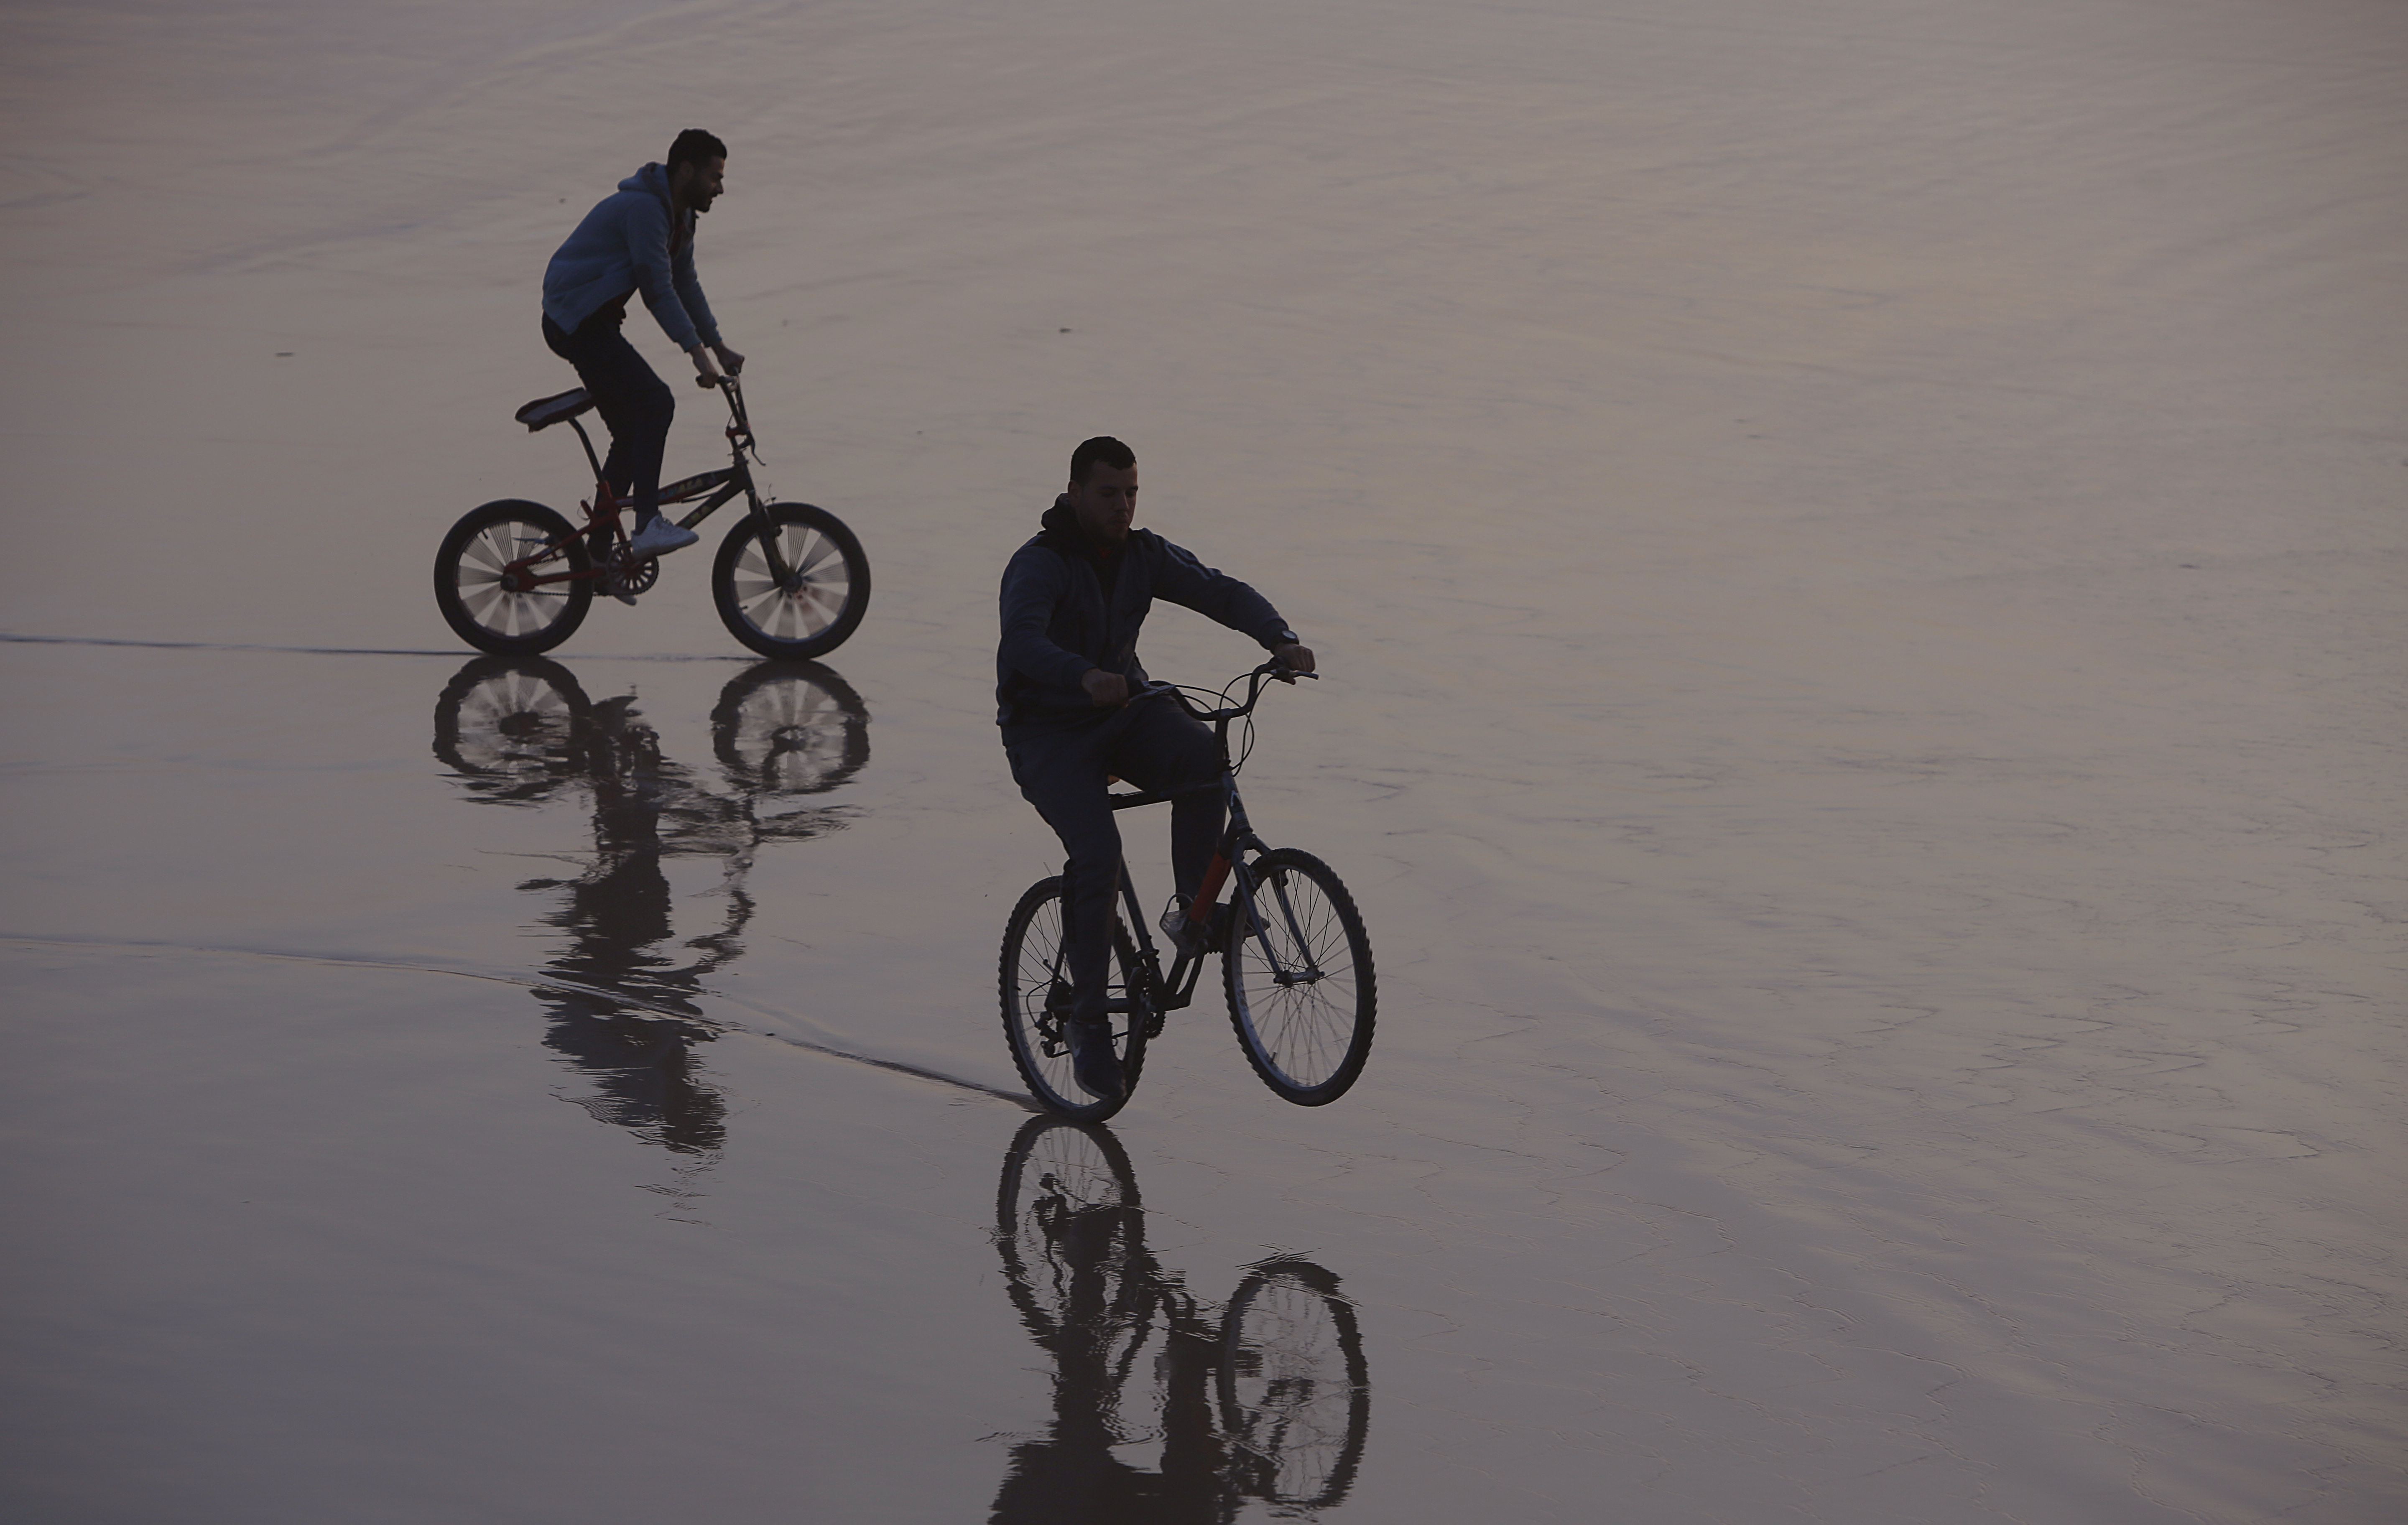 Palestinians ride their bicycles during the sunset at the beach, in Gaza City, Saturday, Feb.22, 2020. The beach is one of the few open public spaces in this densely populated city. (AP Photo/Hatem Moussa)